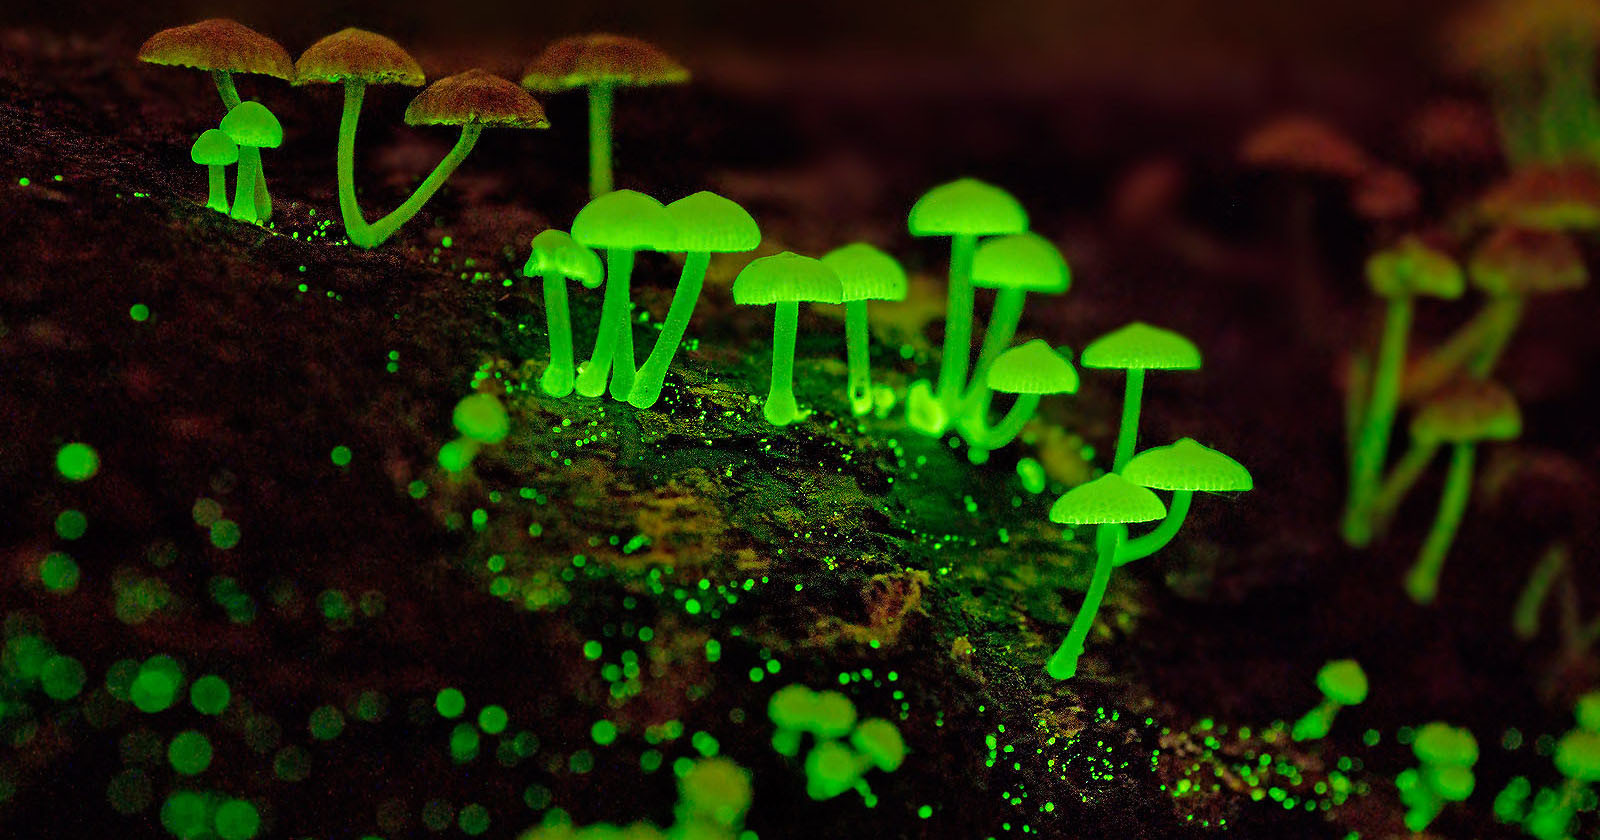 Photographing Glowing Mushrooms in Singapore